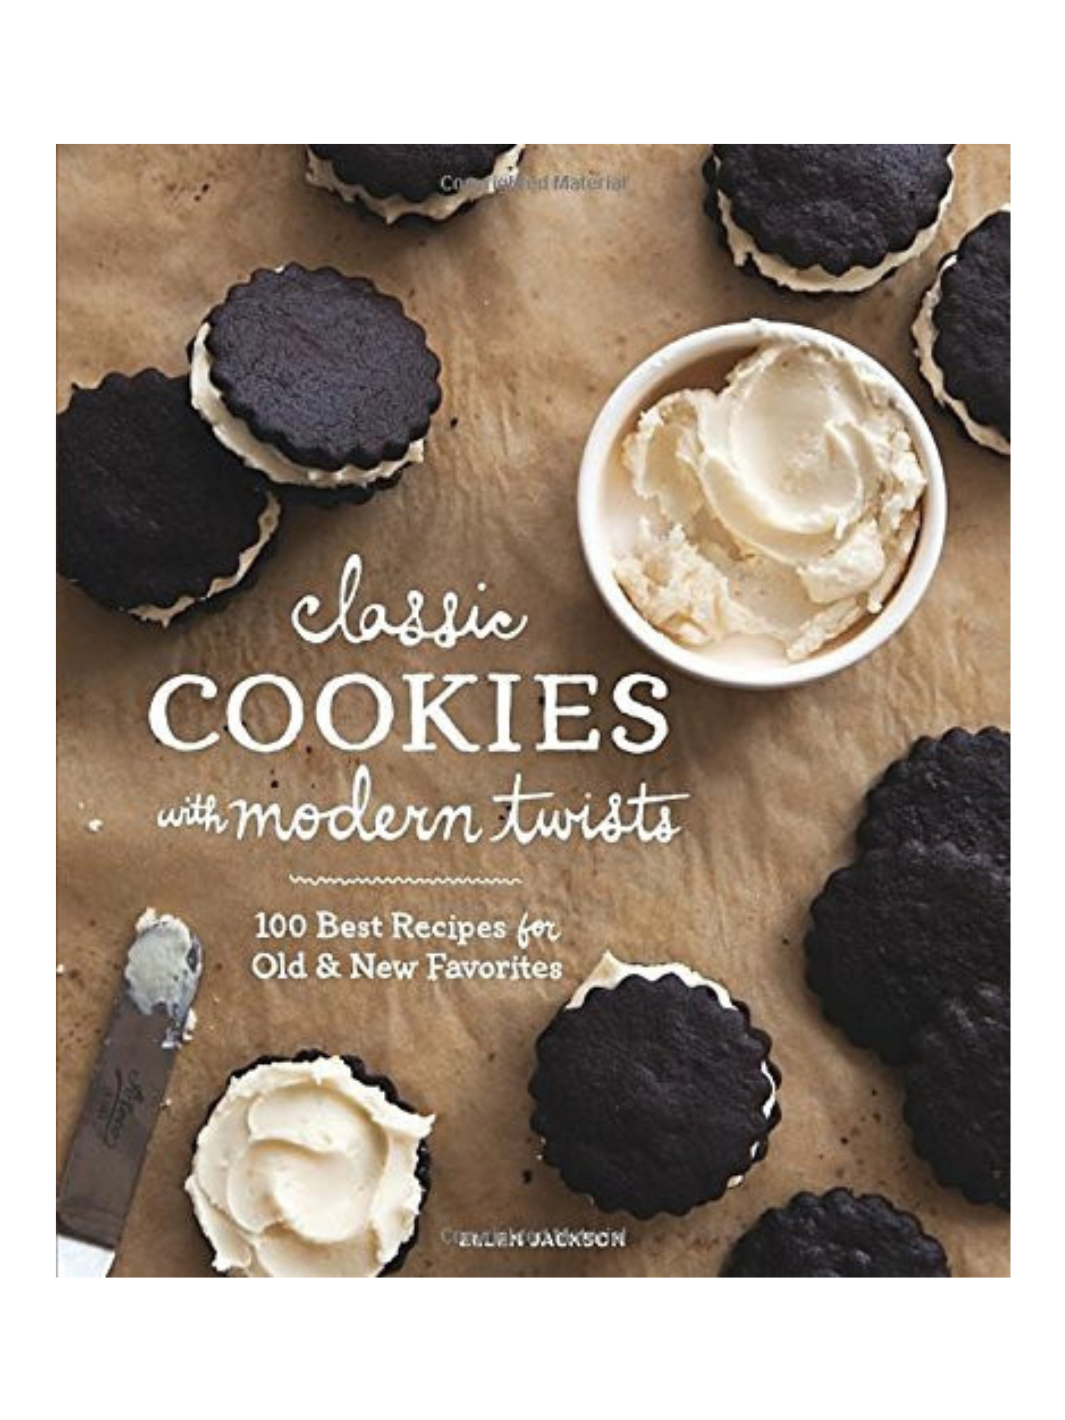 Classic Cookies with Modern Twists Cookbook